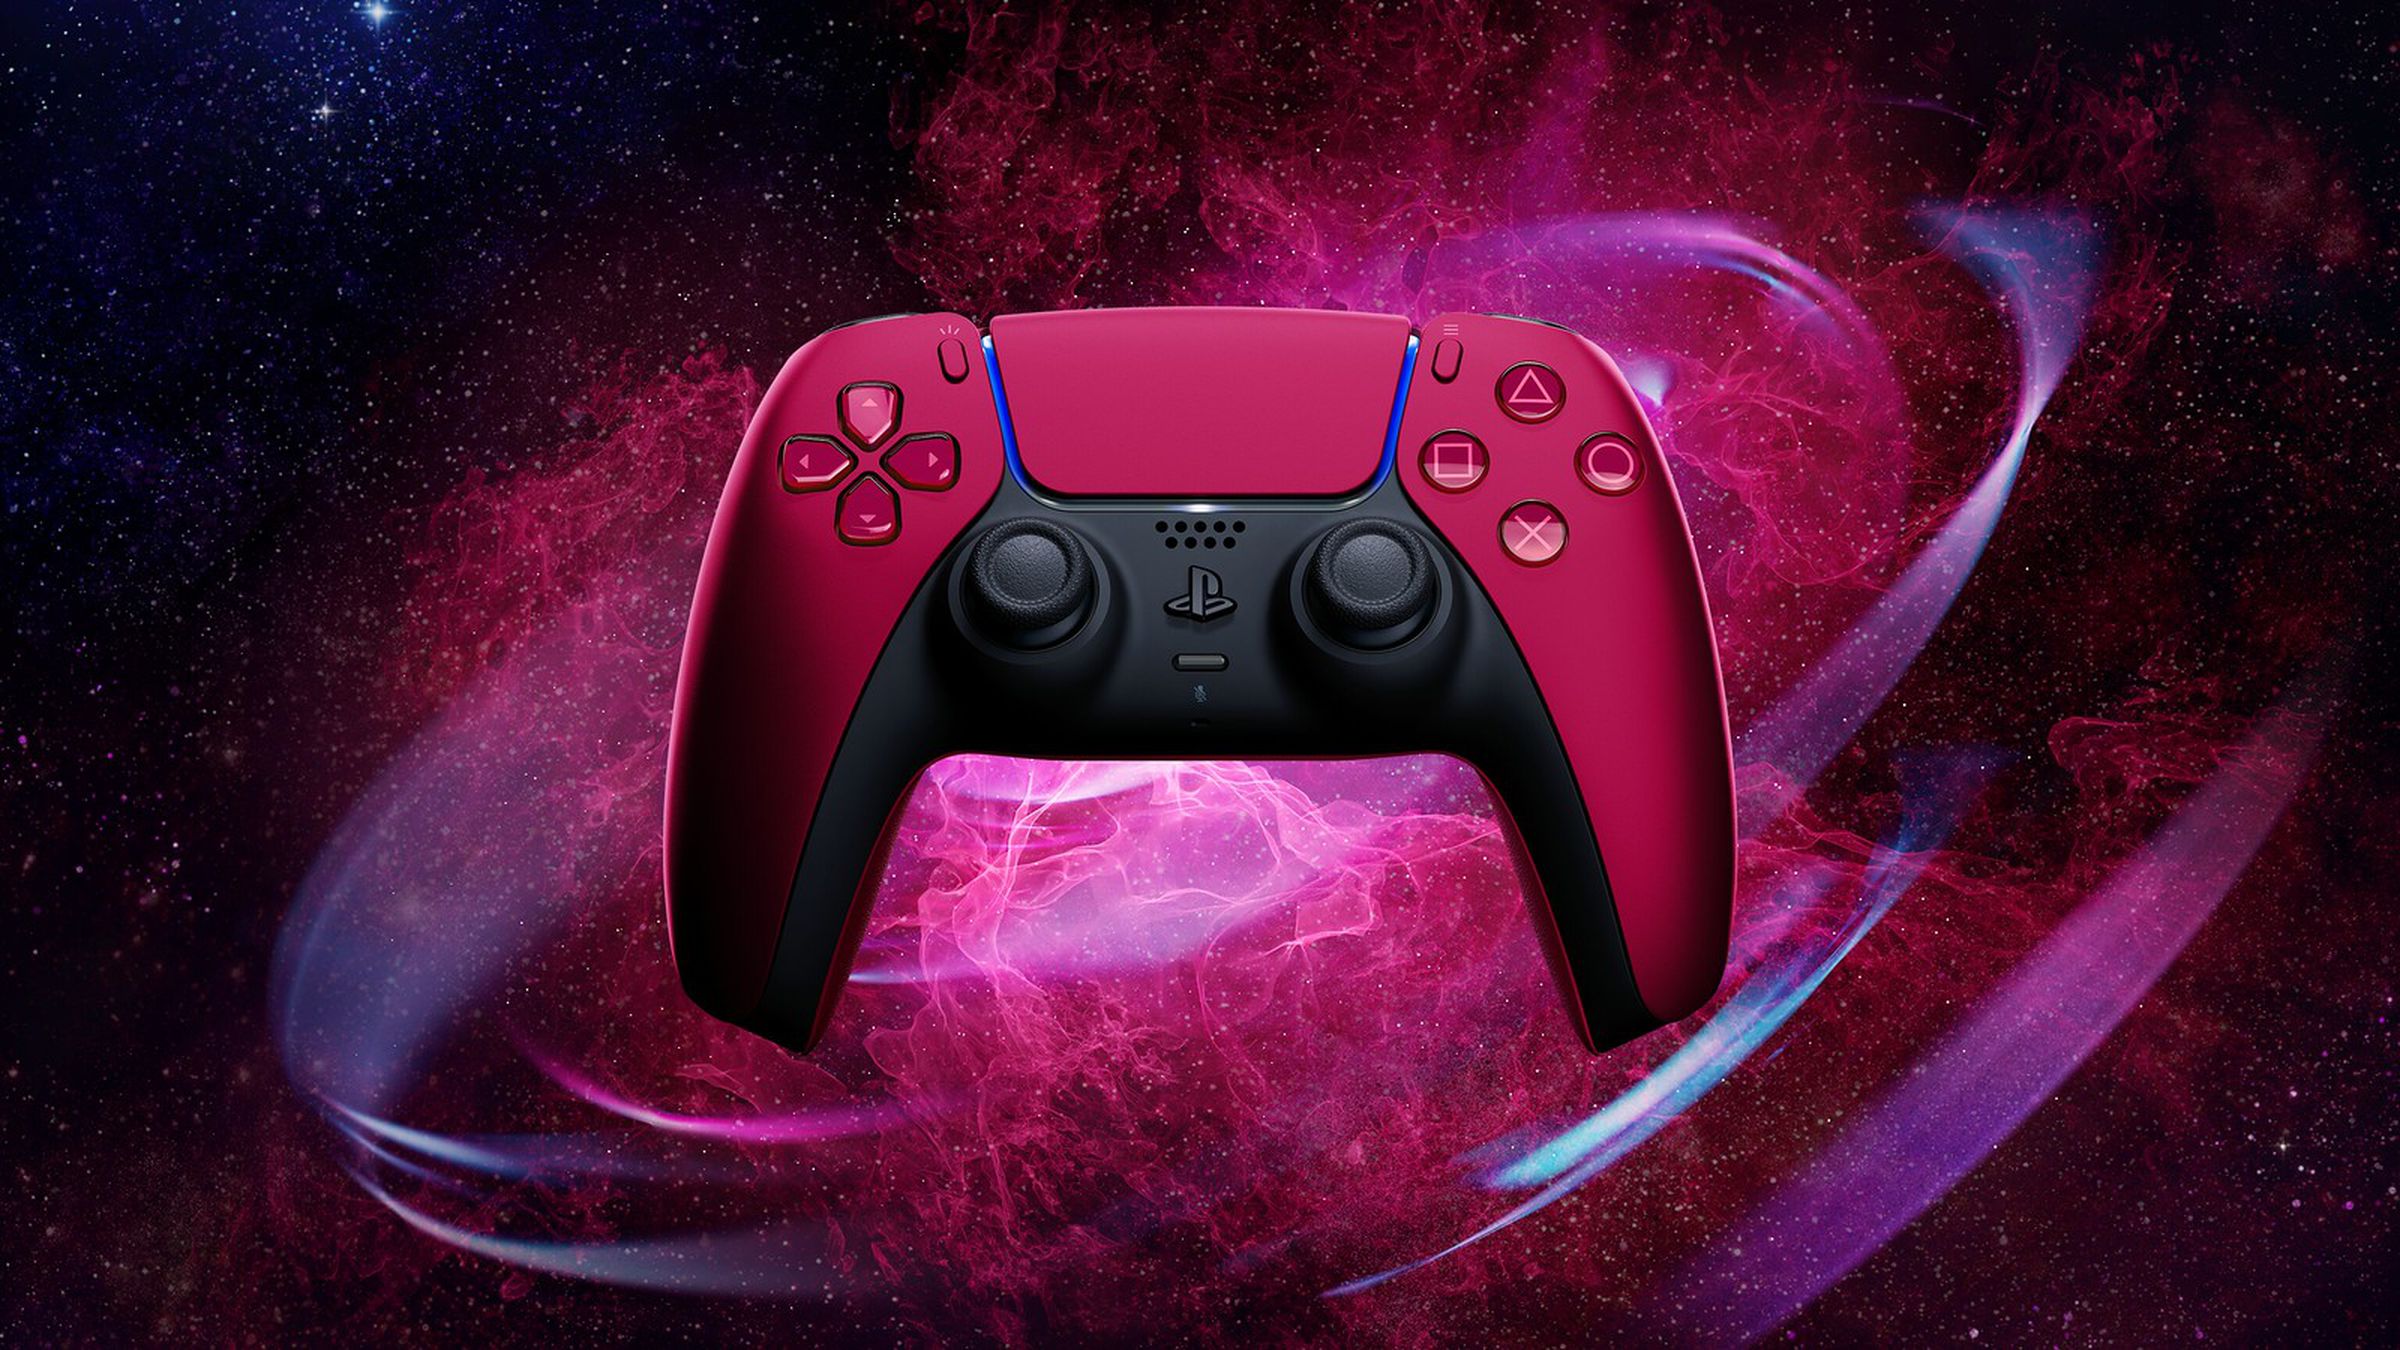 A red DualSense Wireless Controller against a space-themed background.